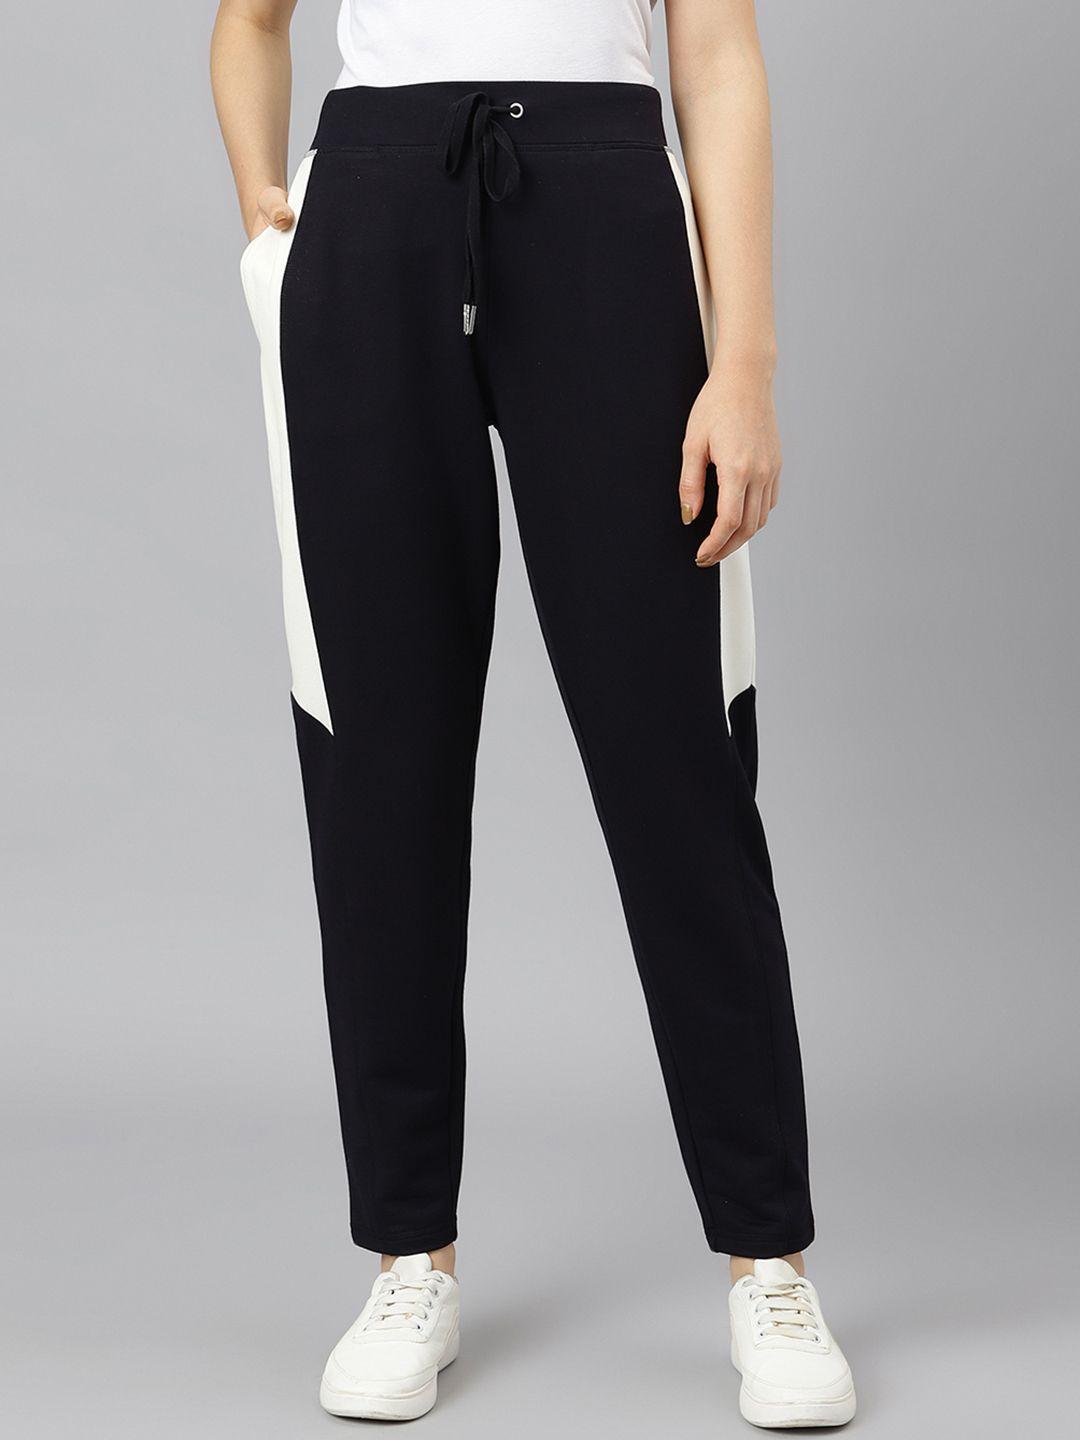 beverly-hills-polo-club-women-black-&-white-colorblocked-track-pants